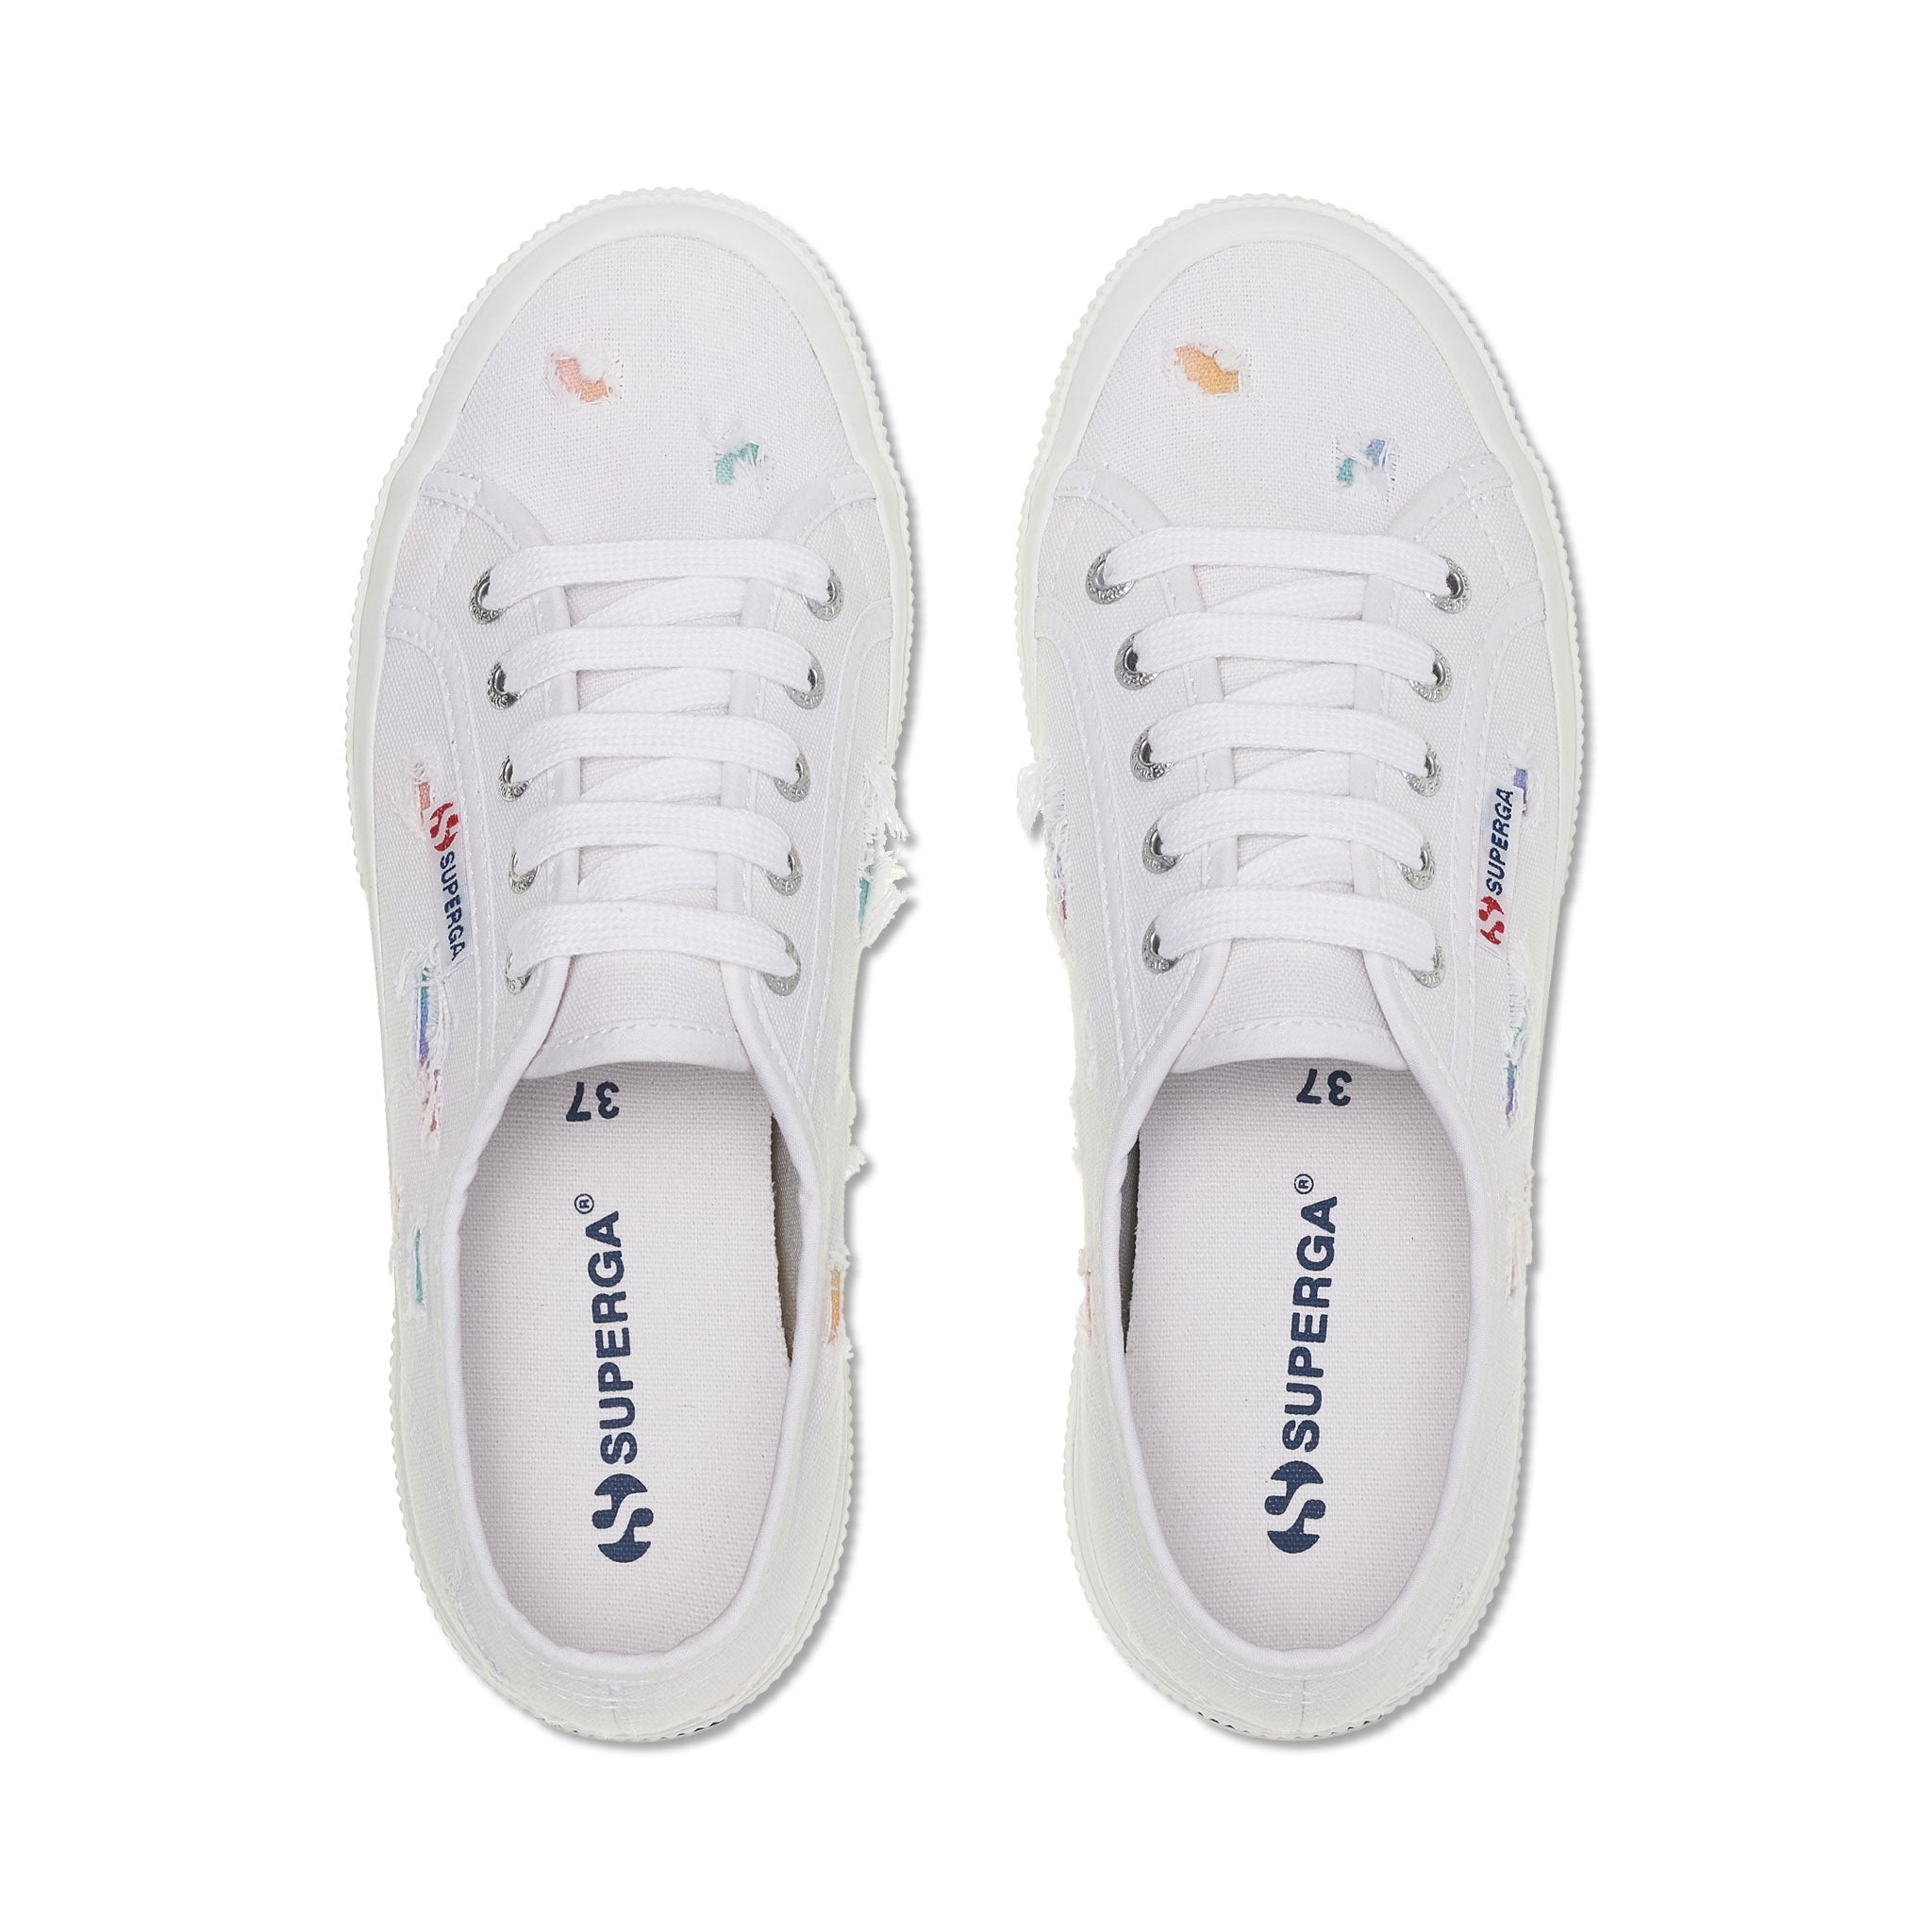 Superga 2750 Ripped Multicolor Cotton Sneakers - White Multicolor Shaded Print. Top view.